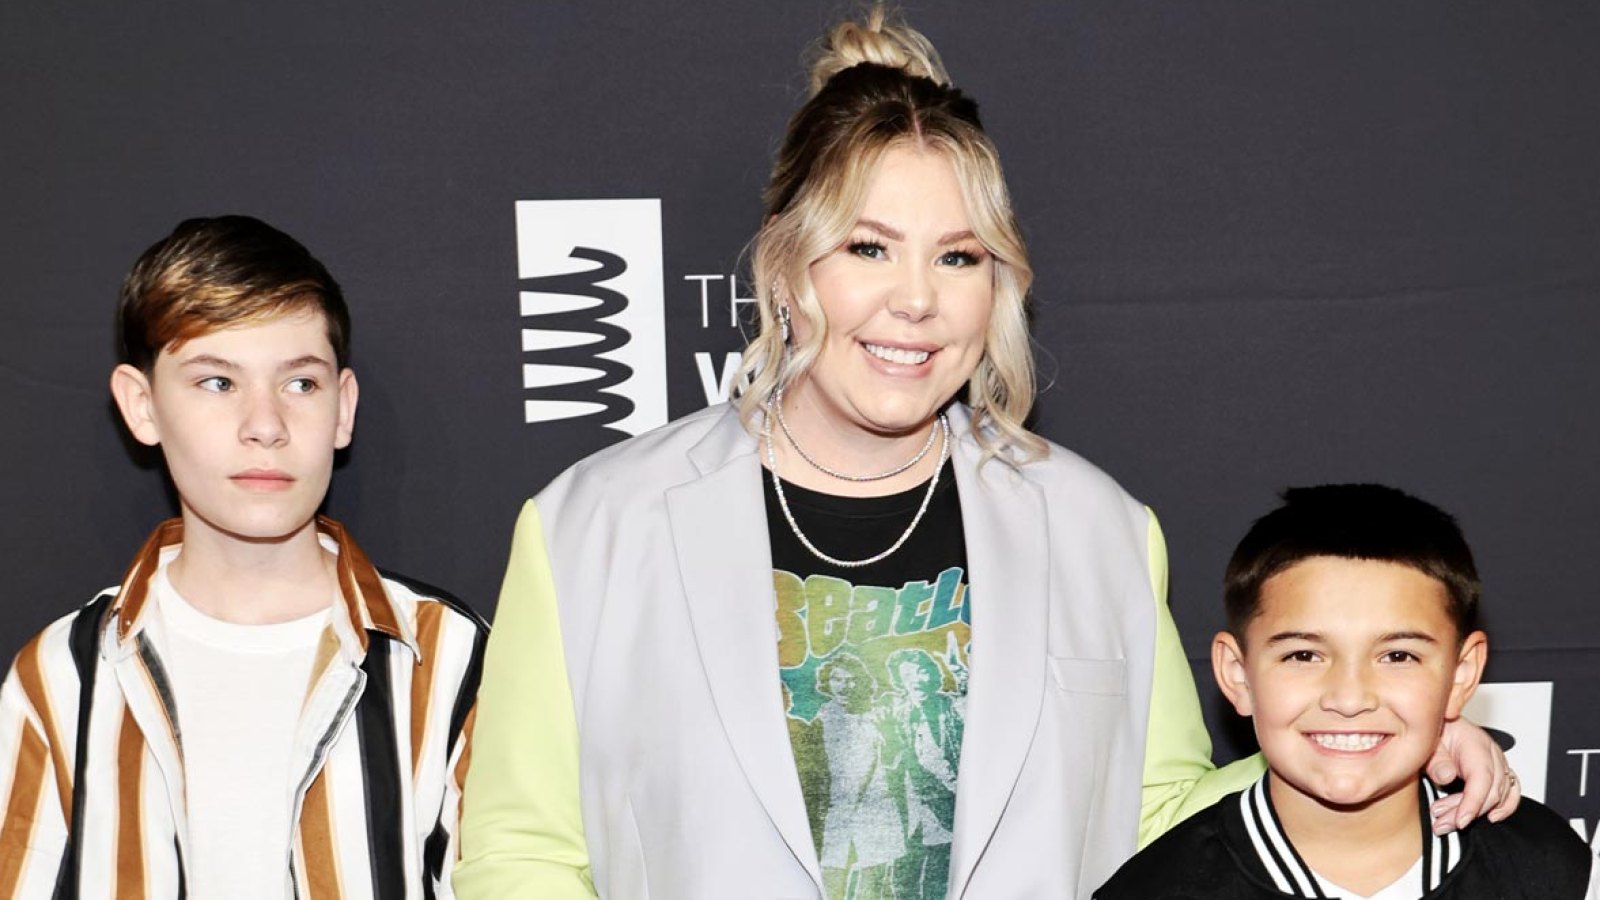 Teen Mom 2 Alum Kailyn Lowry Jokes About Daily Life as a Mom of 7 After Welcoming Twins